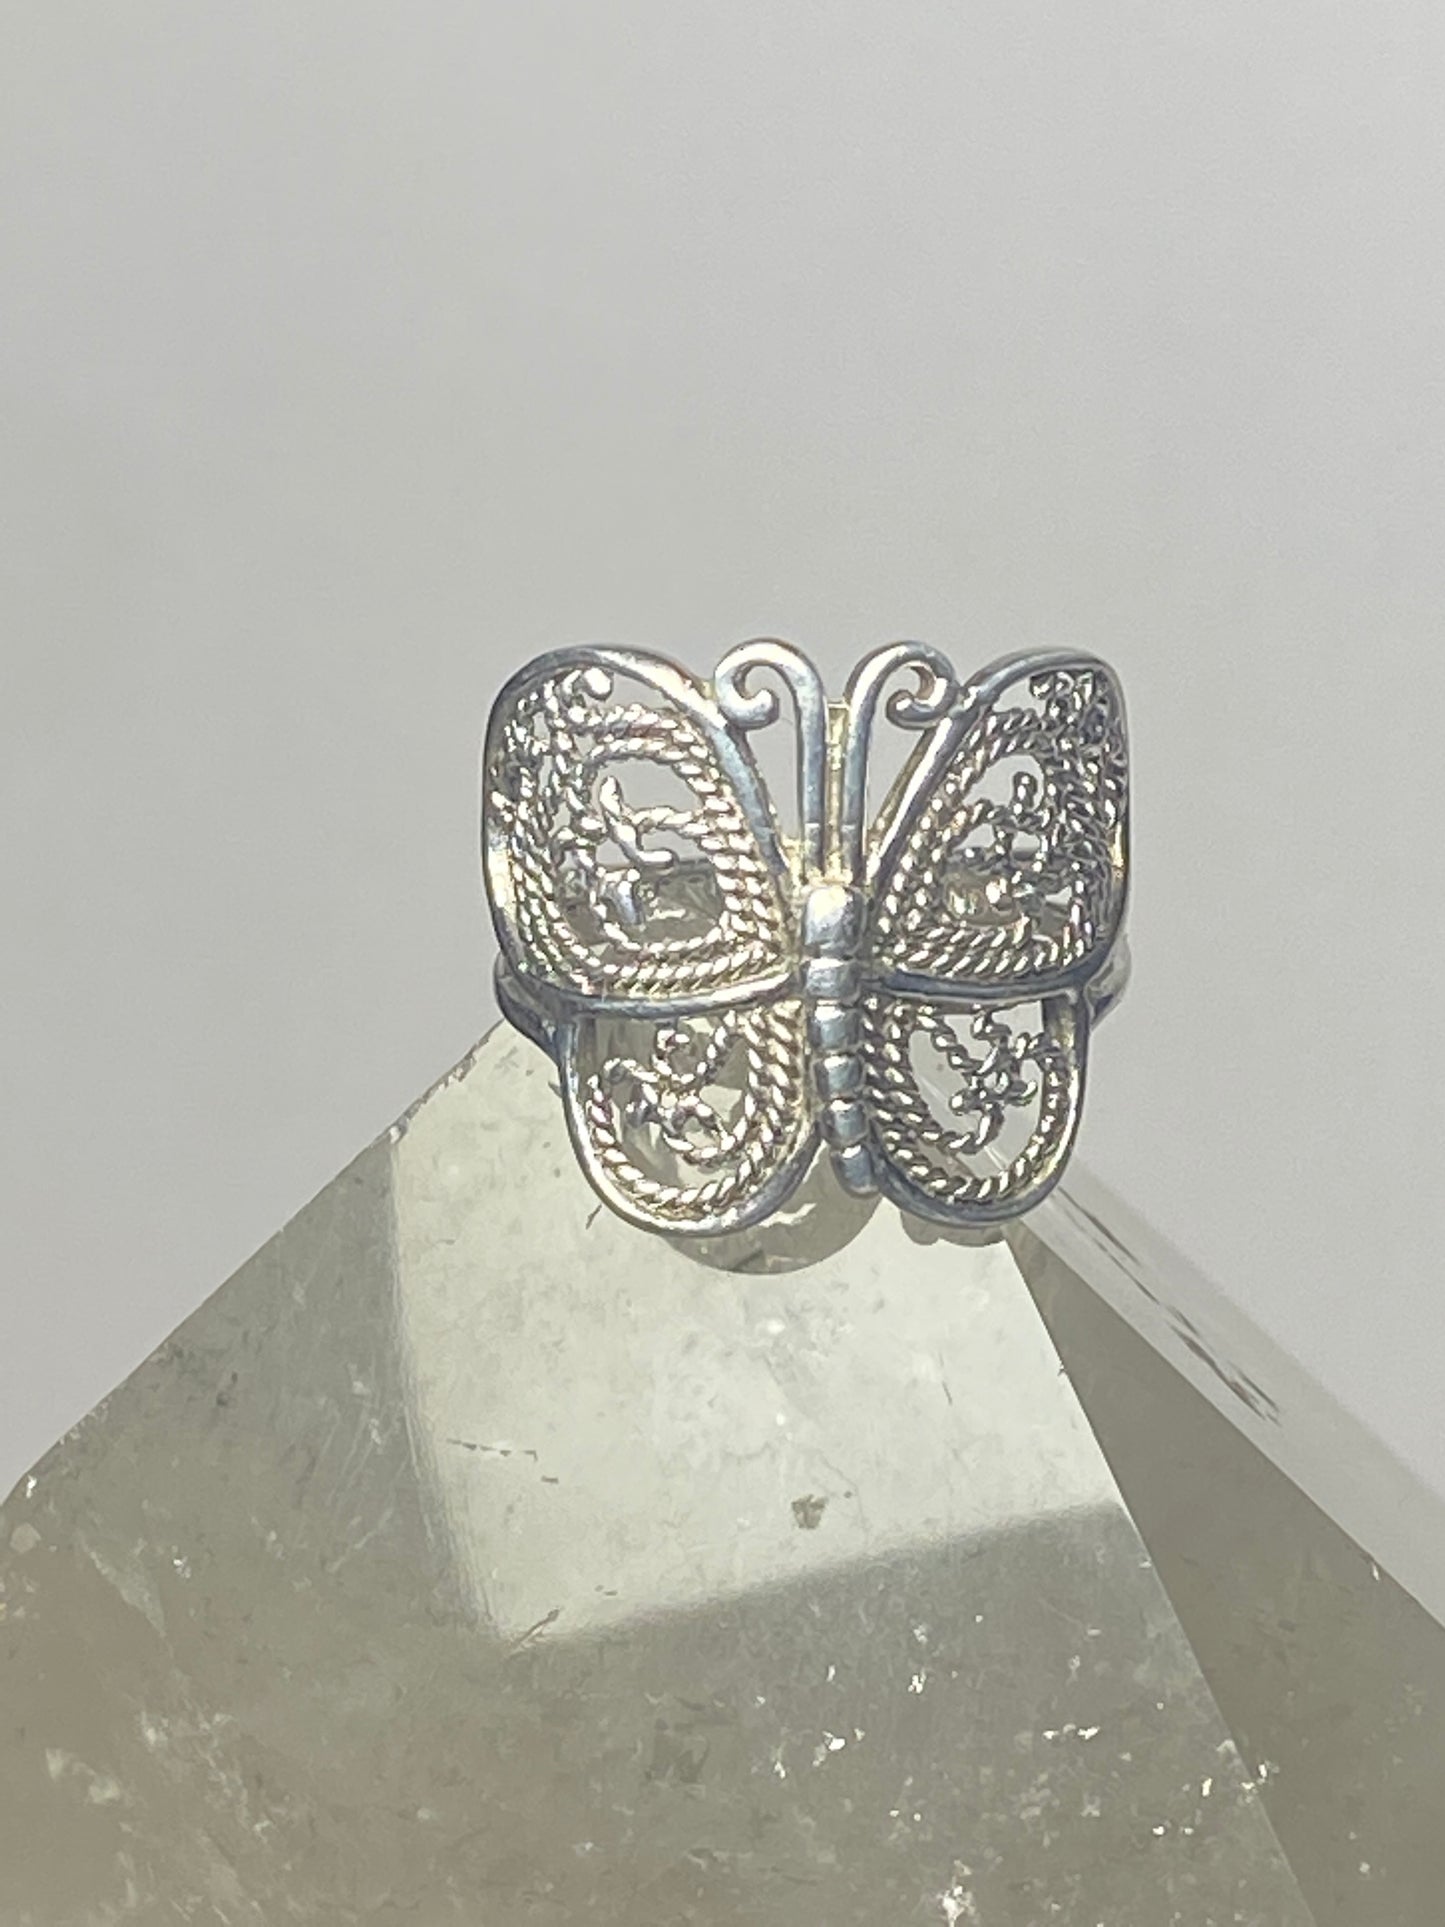 Butterfly ring size 6.75 filigree band sterling silver women girls